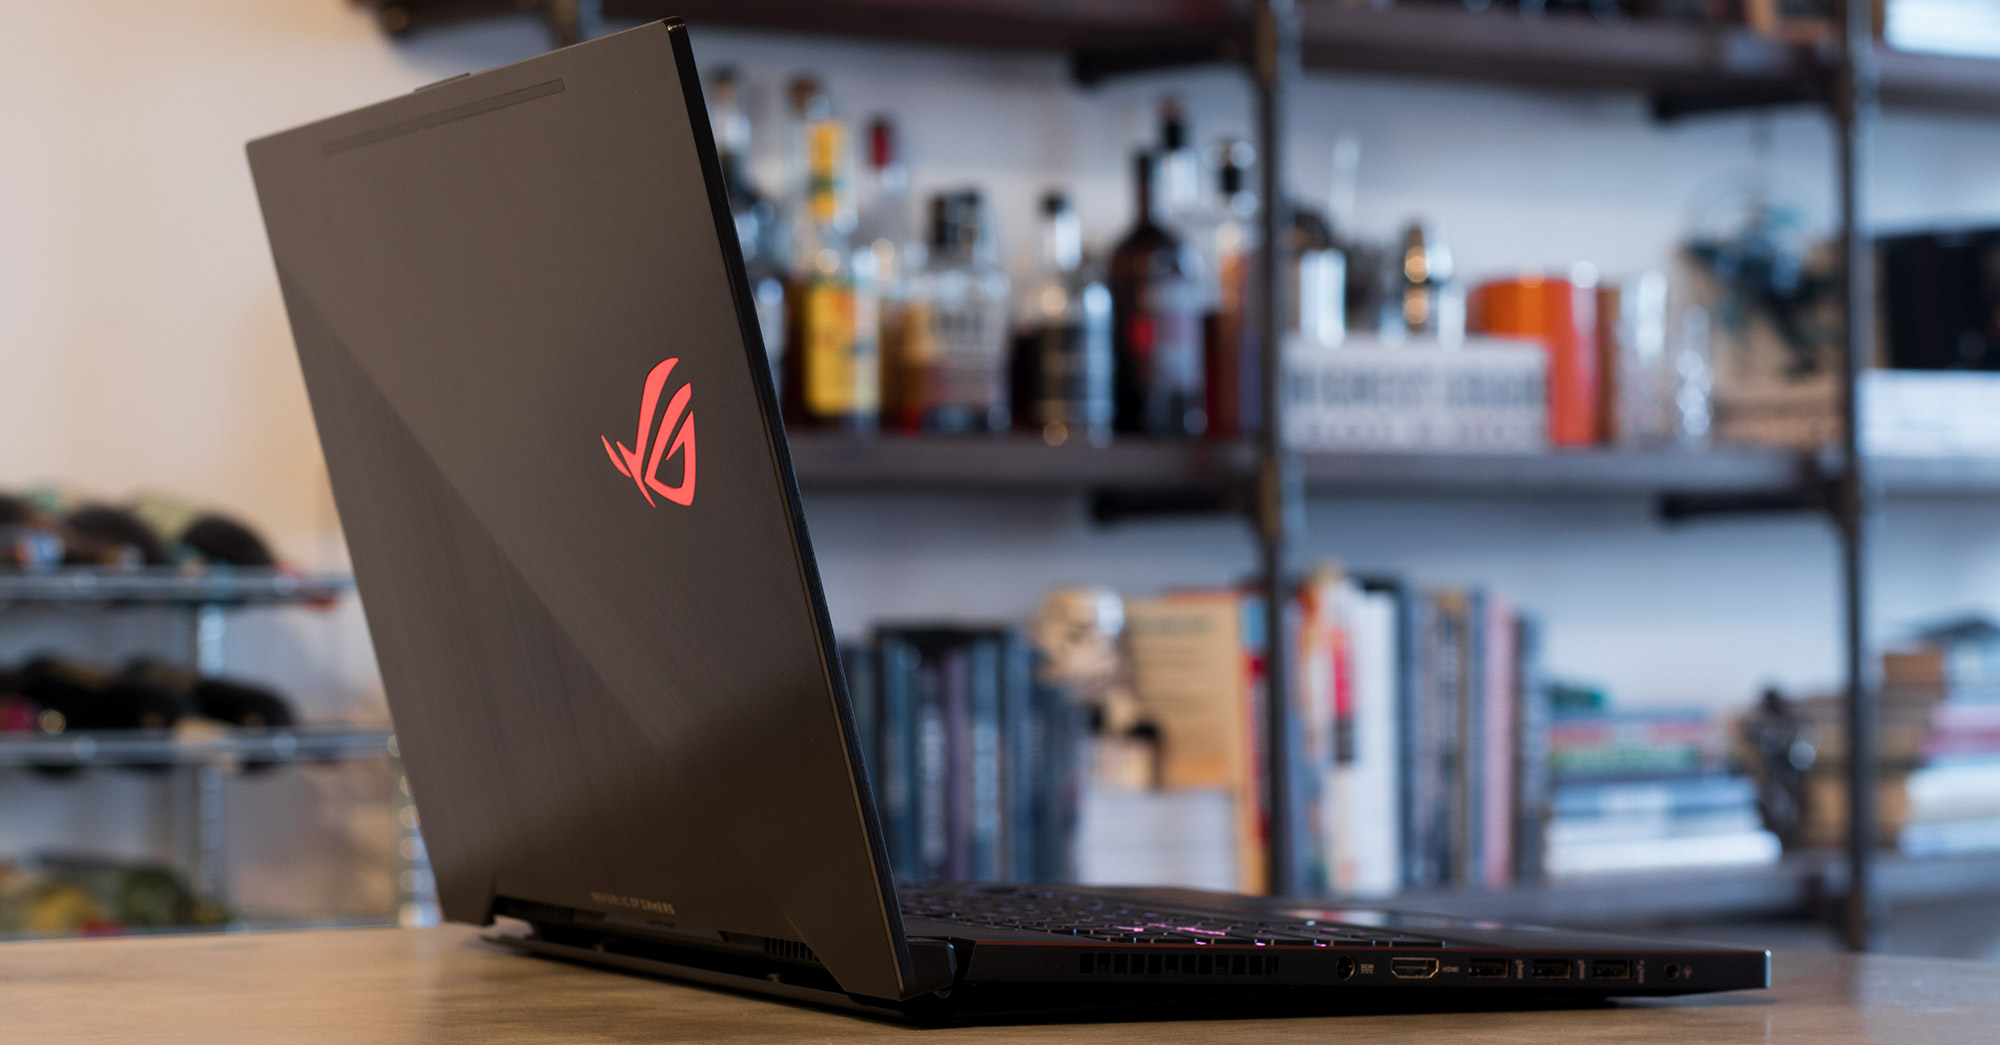 Introducing the ROG Zephyrus M GM501, an ultra-slim gaming laptop without  compromise